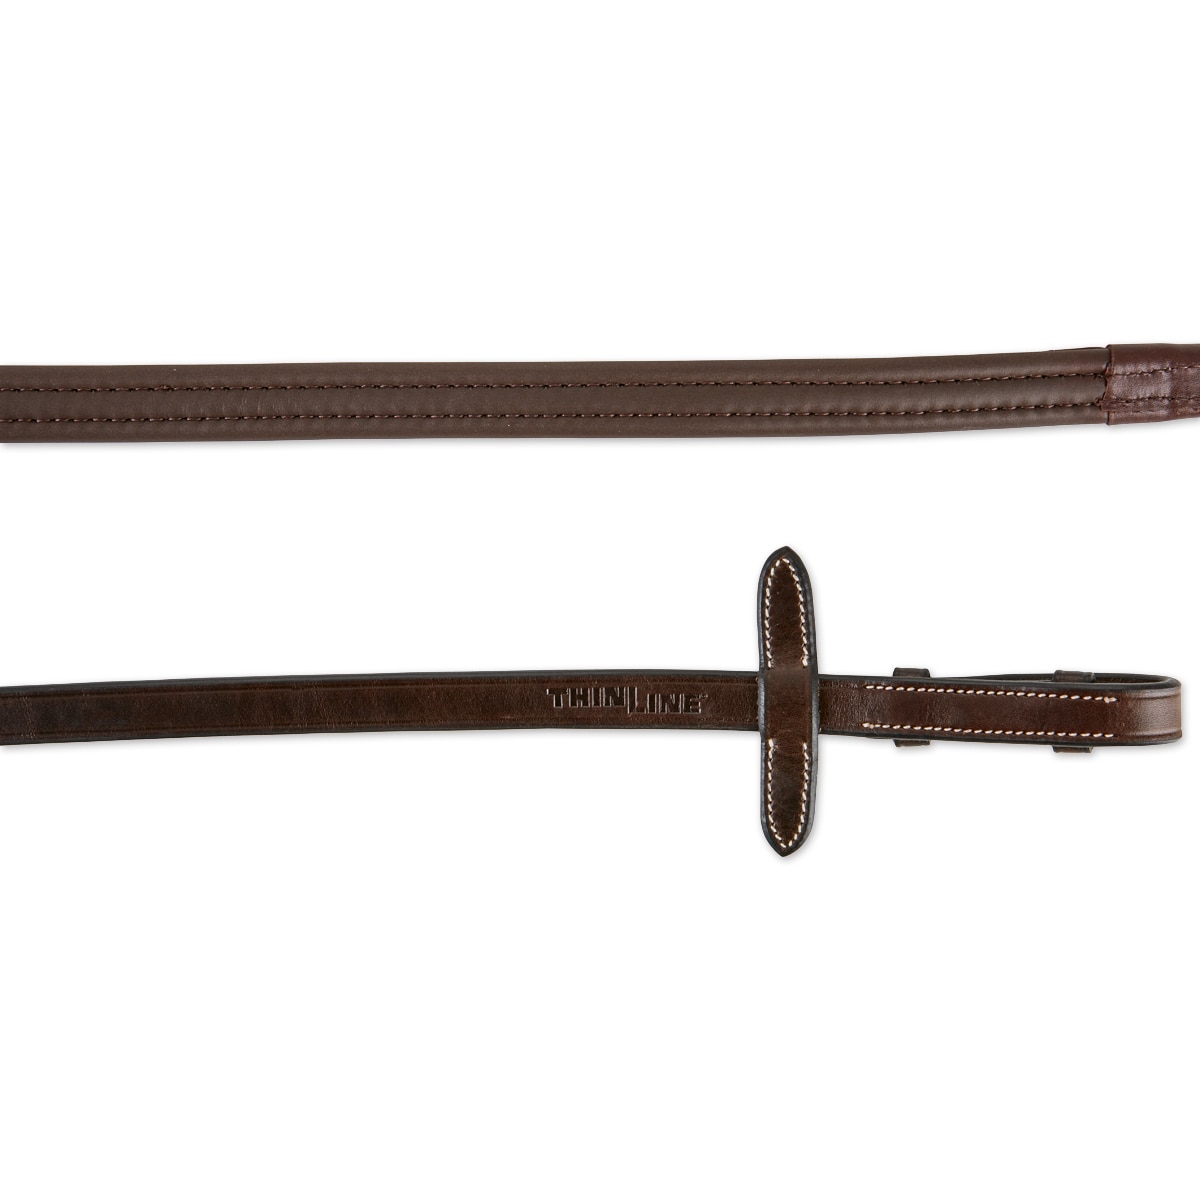 FSS POSH German ROUND ROLLED Leather Rubber Lined Inside Grip Dressage Reins NEW 